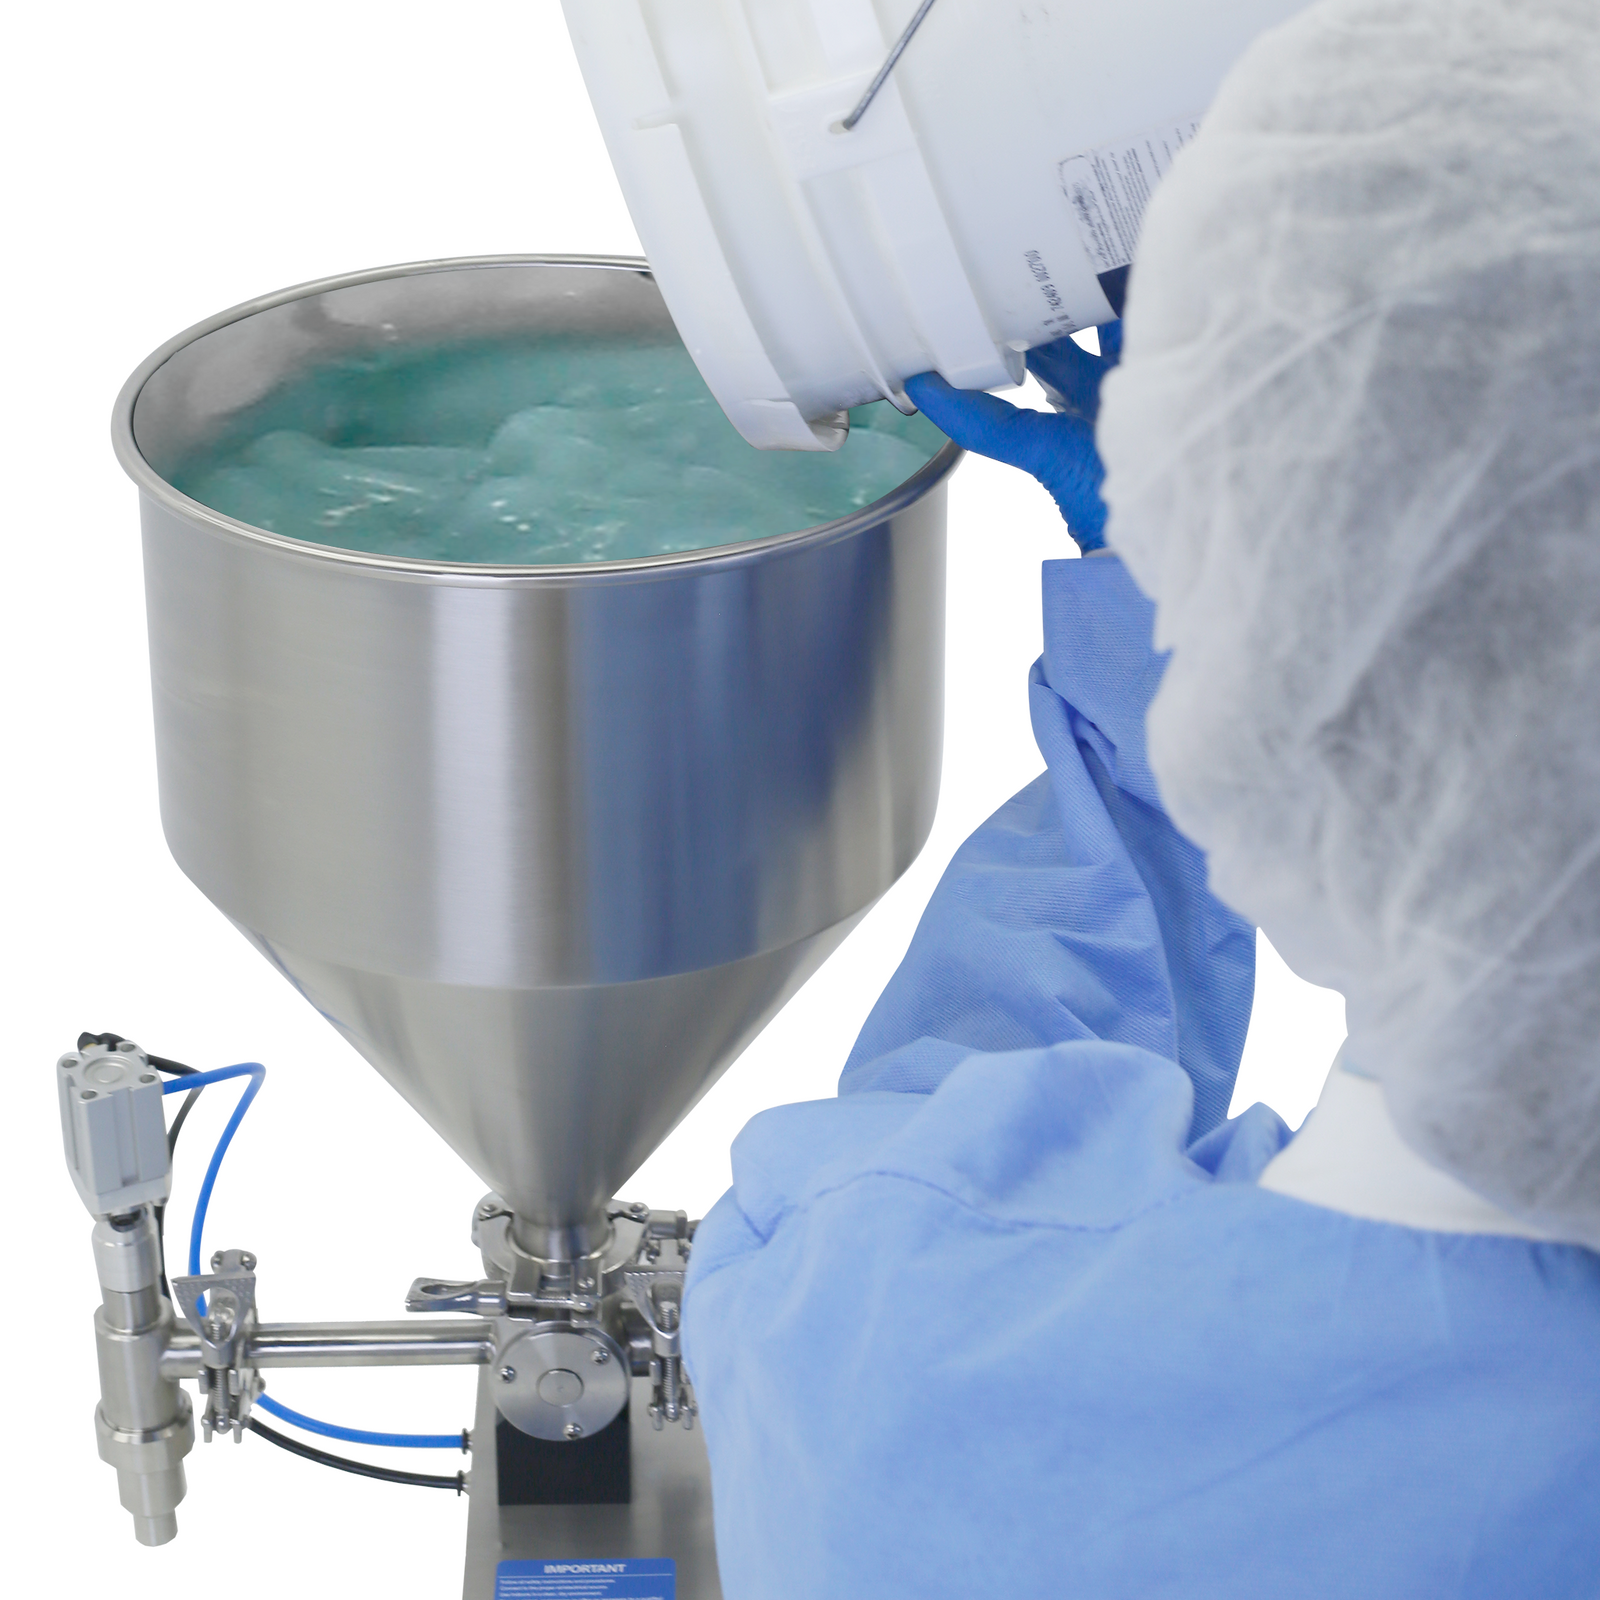 Person wearing disposable clothing and gloves standing beside a Piston filler. He is dispensing a green cream into the hopper of a table top JORES TECHNOLOGIES® Piston filler for paste